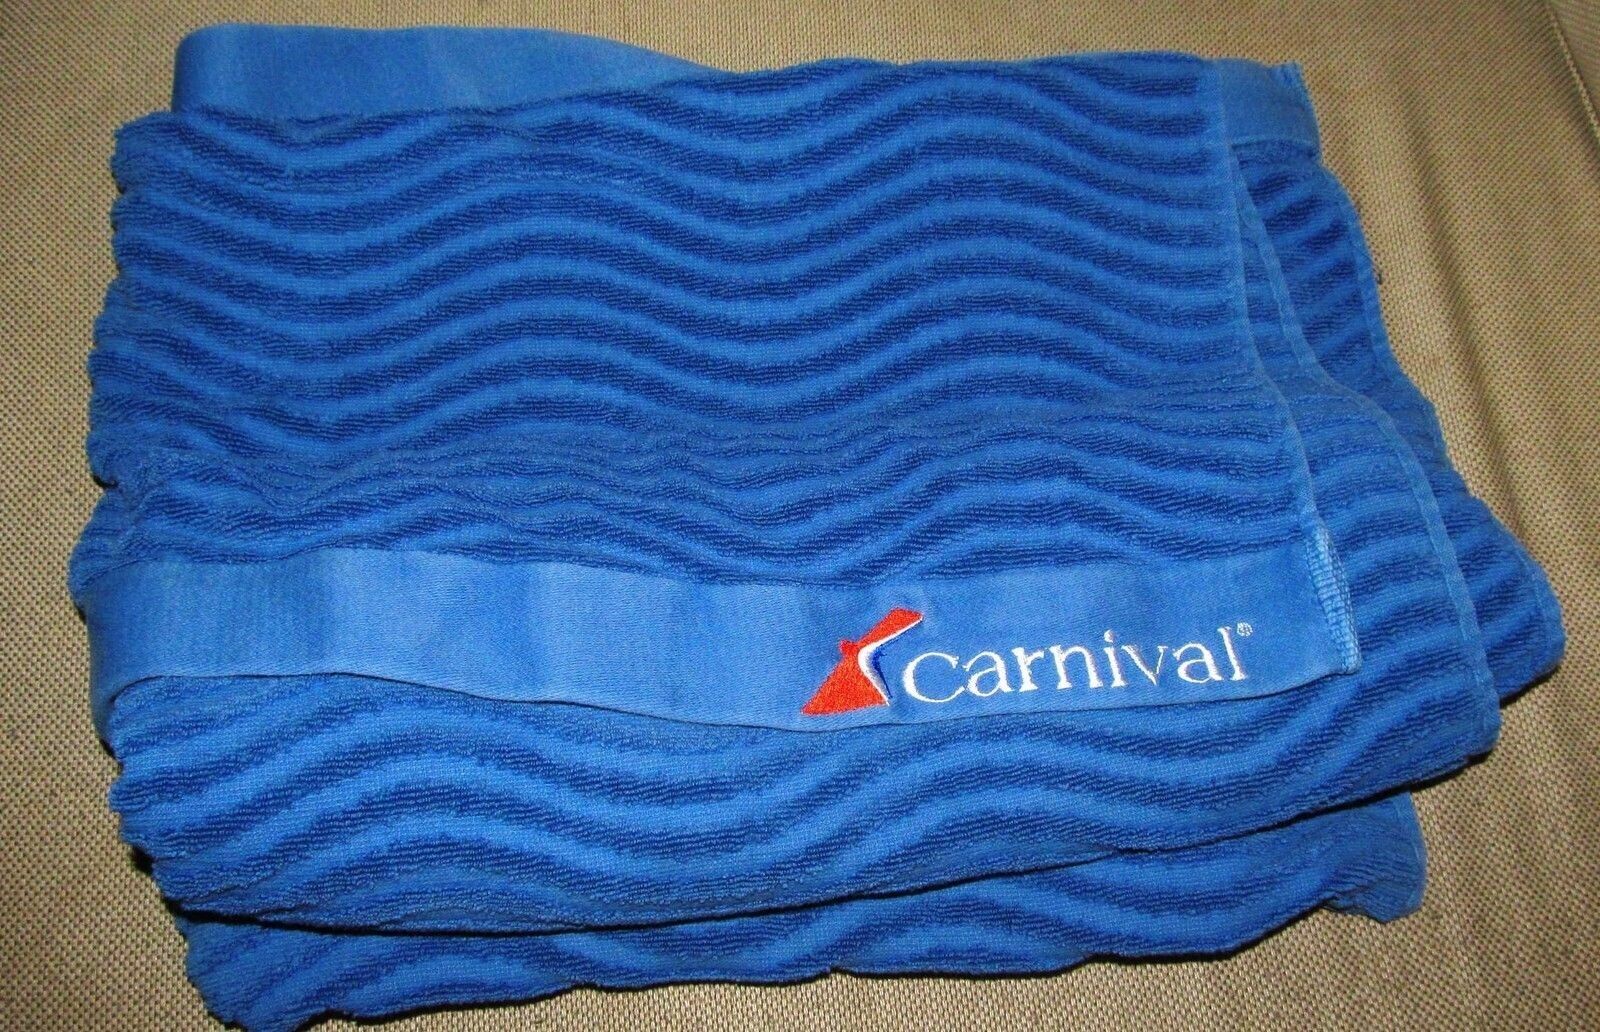 CARNIVAL CRUISE SHIP - Light Blue Towel with Carnival Logo 60\